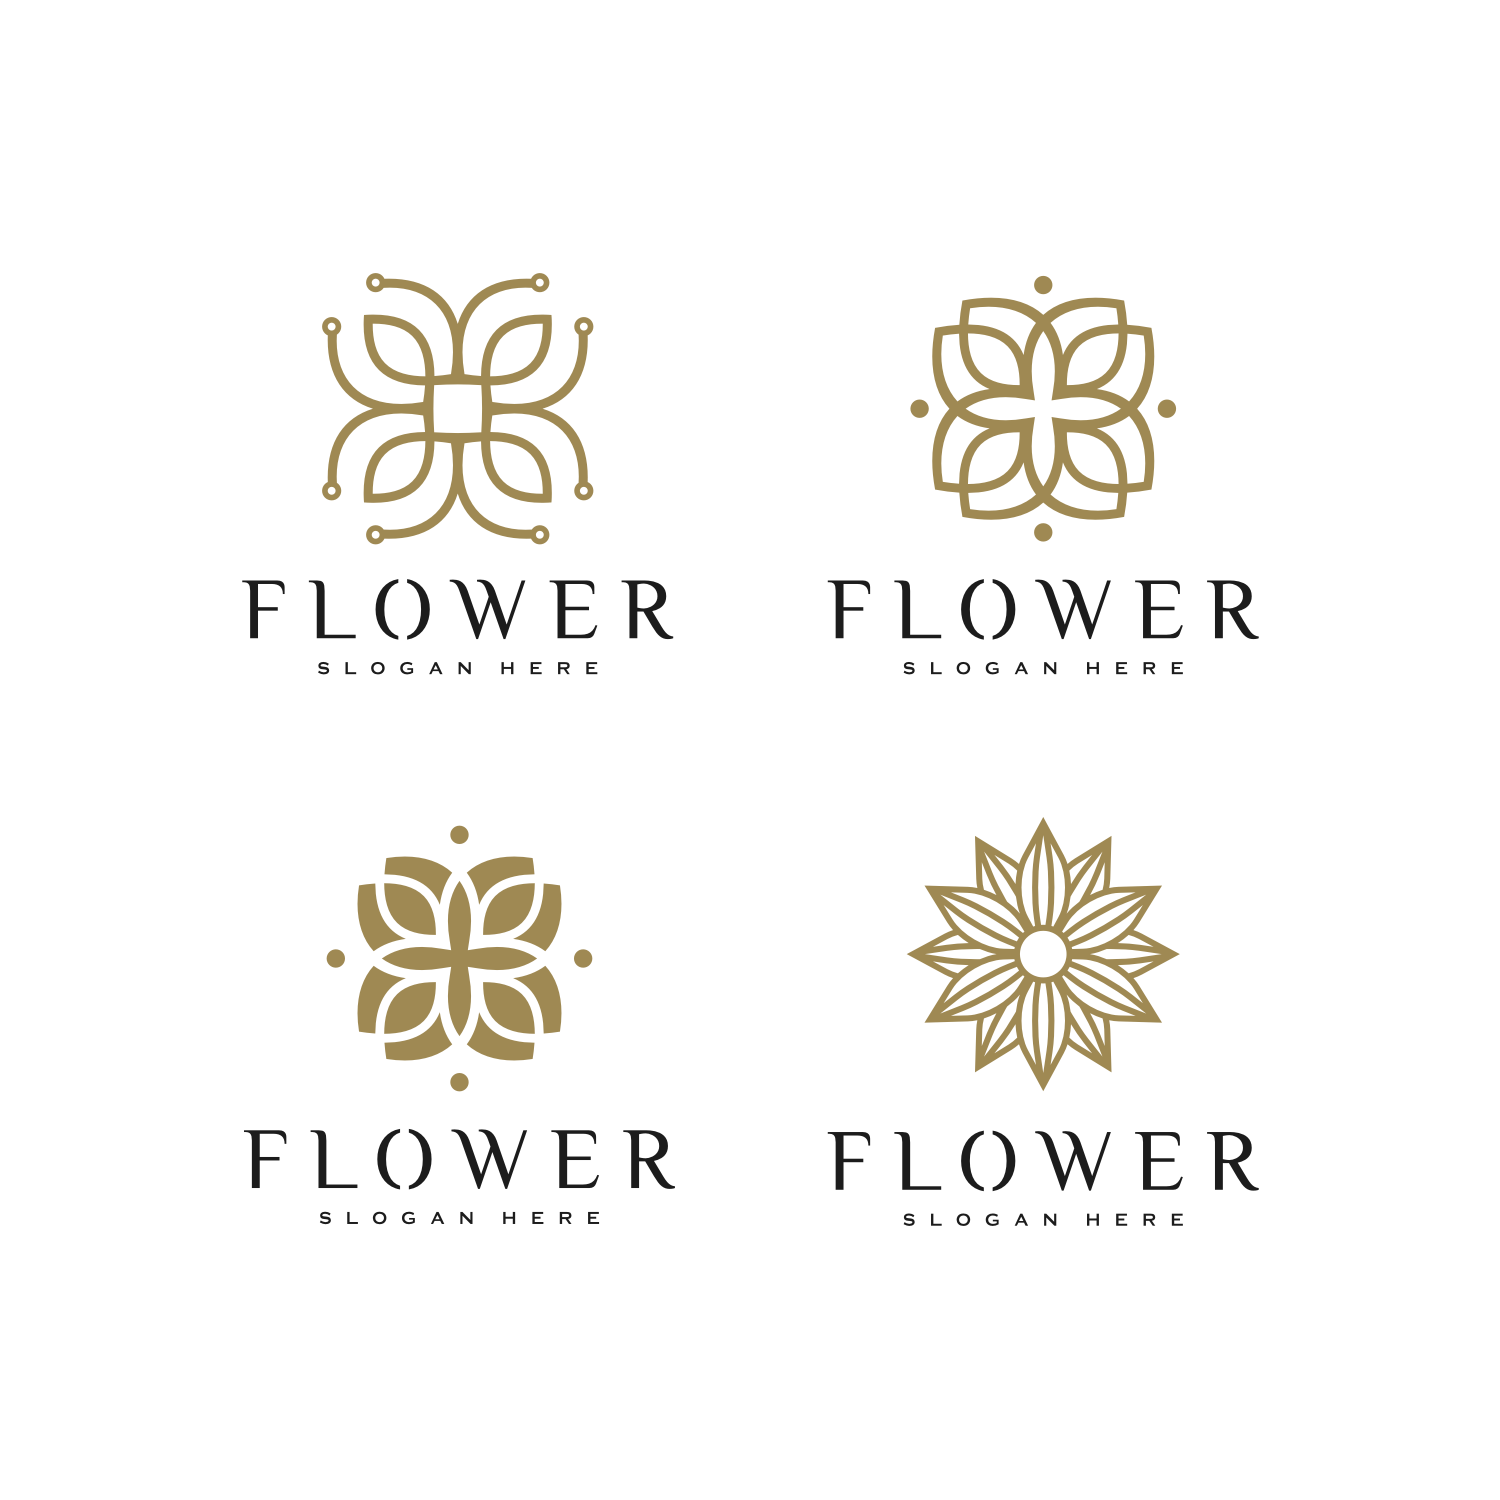 Flower Nature Logo Design Template Vector cover image.